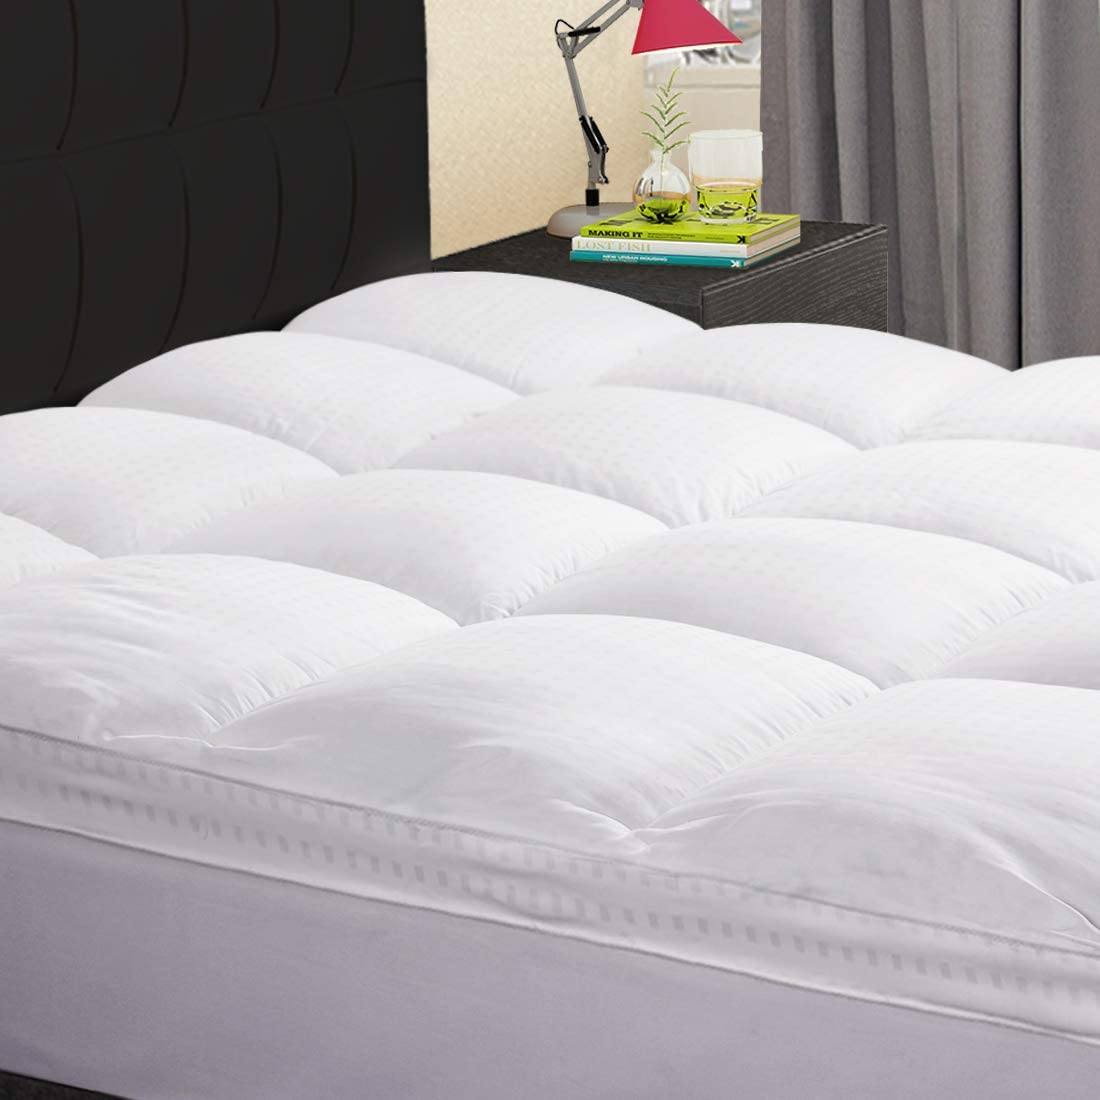 Amazon.com: KARRISM Extra Thick Mattress Topper(King ...